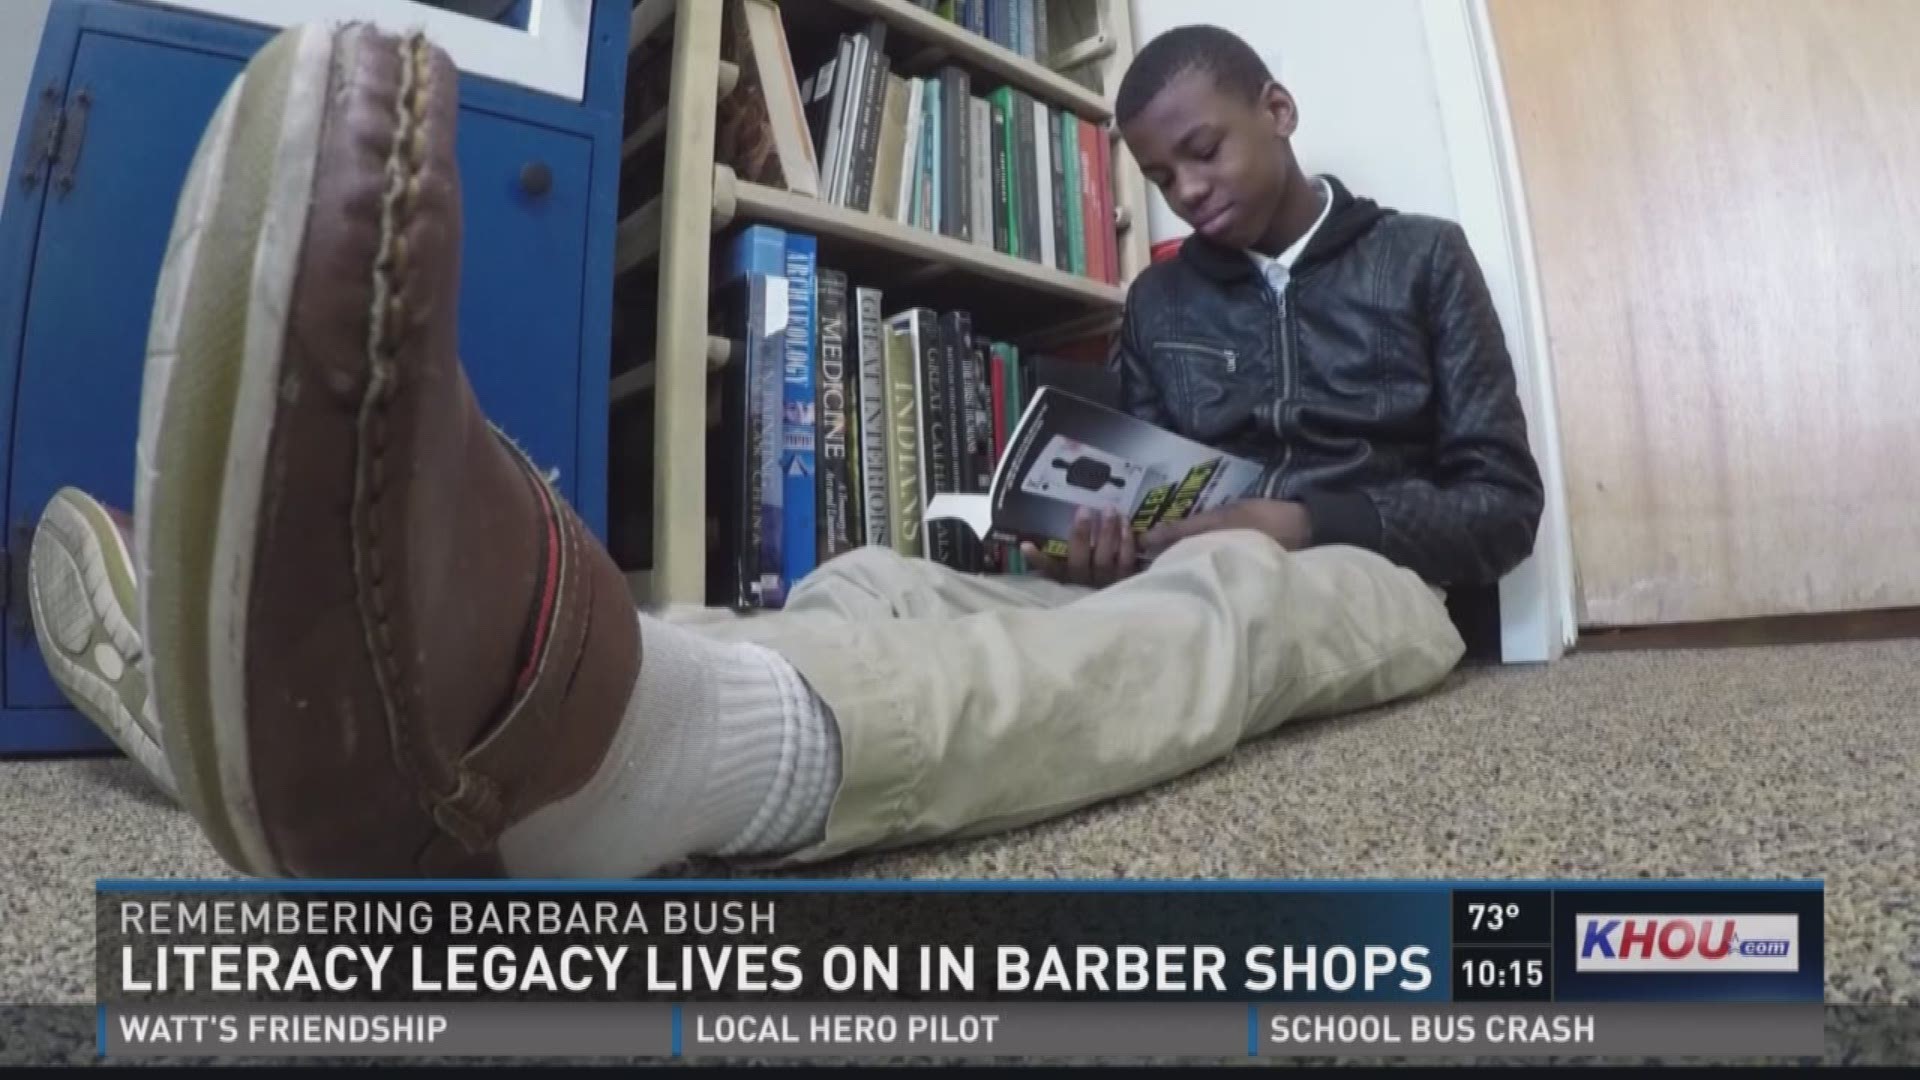 Former First Lady Barbara Bush's literacy legacy is living on in Houston barber shops.